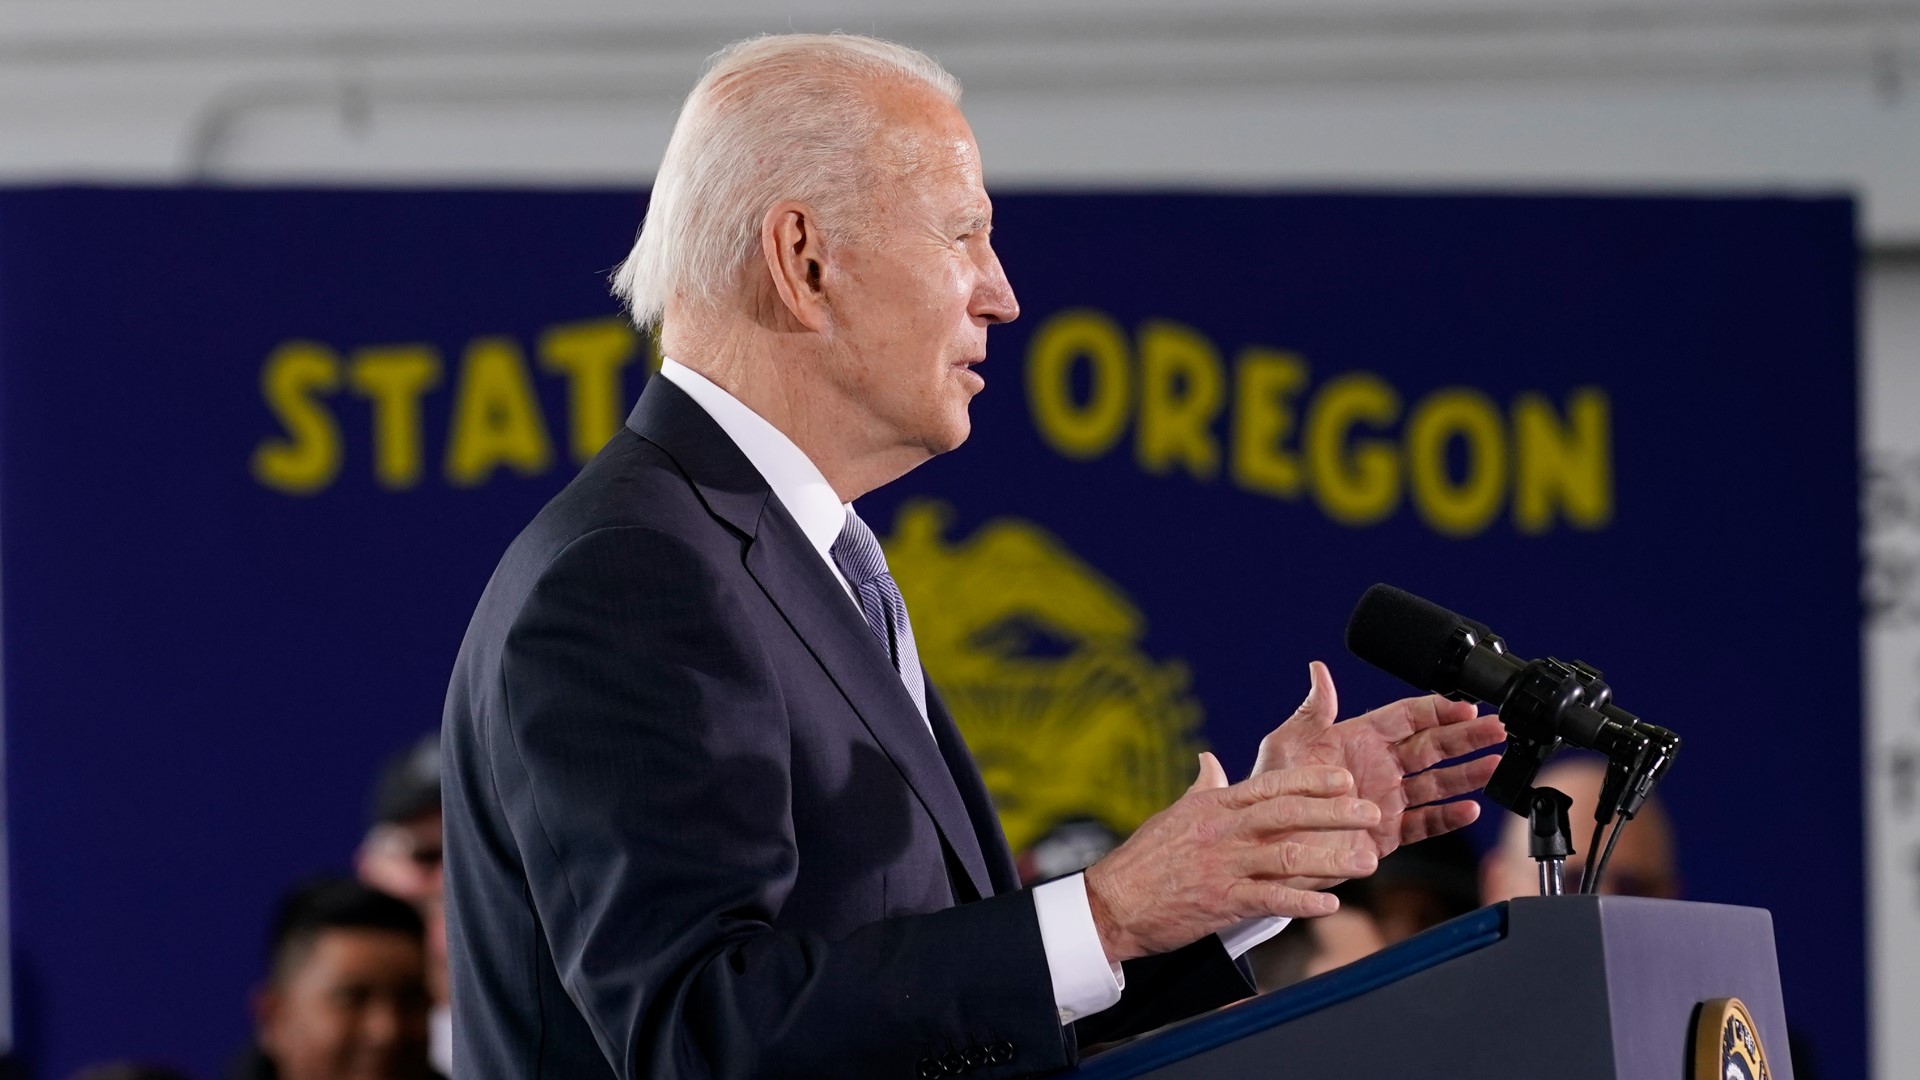 Biden spoke about local infrastructure investments during a visit to Portland, his first visit to the Pacific Northwest as president.